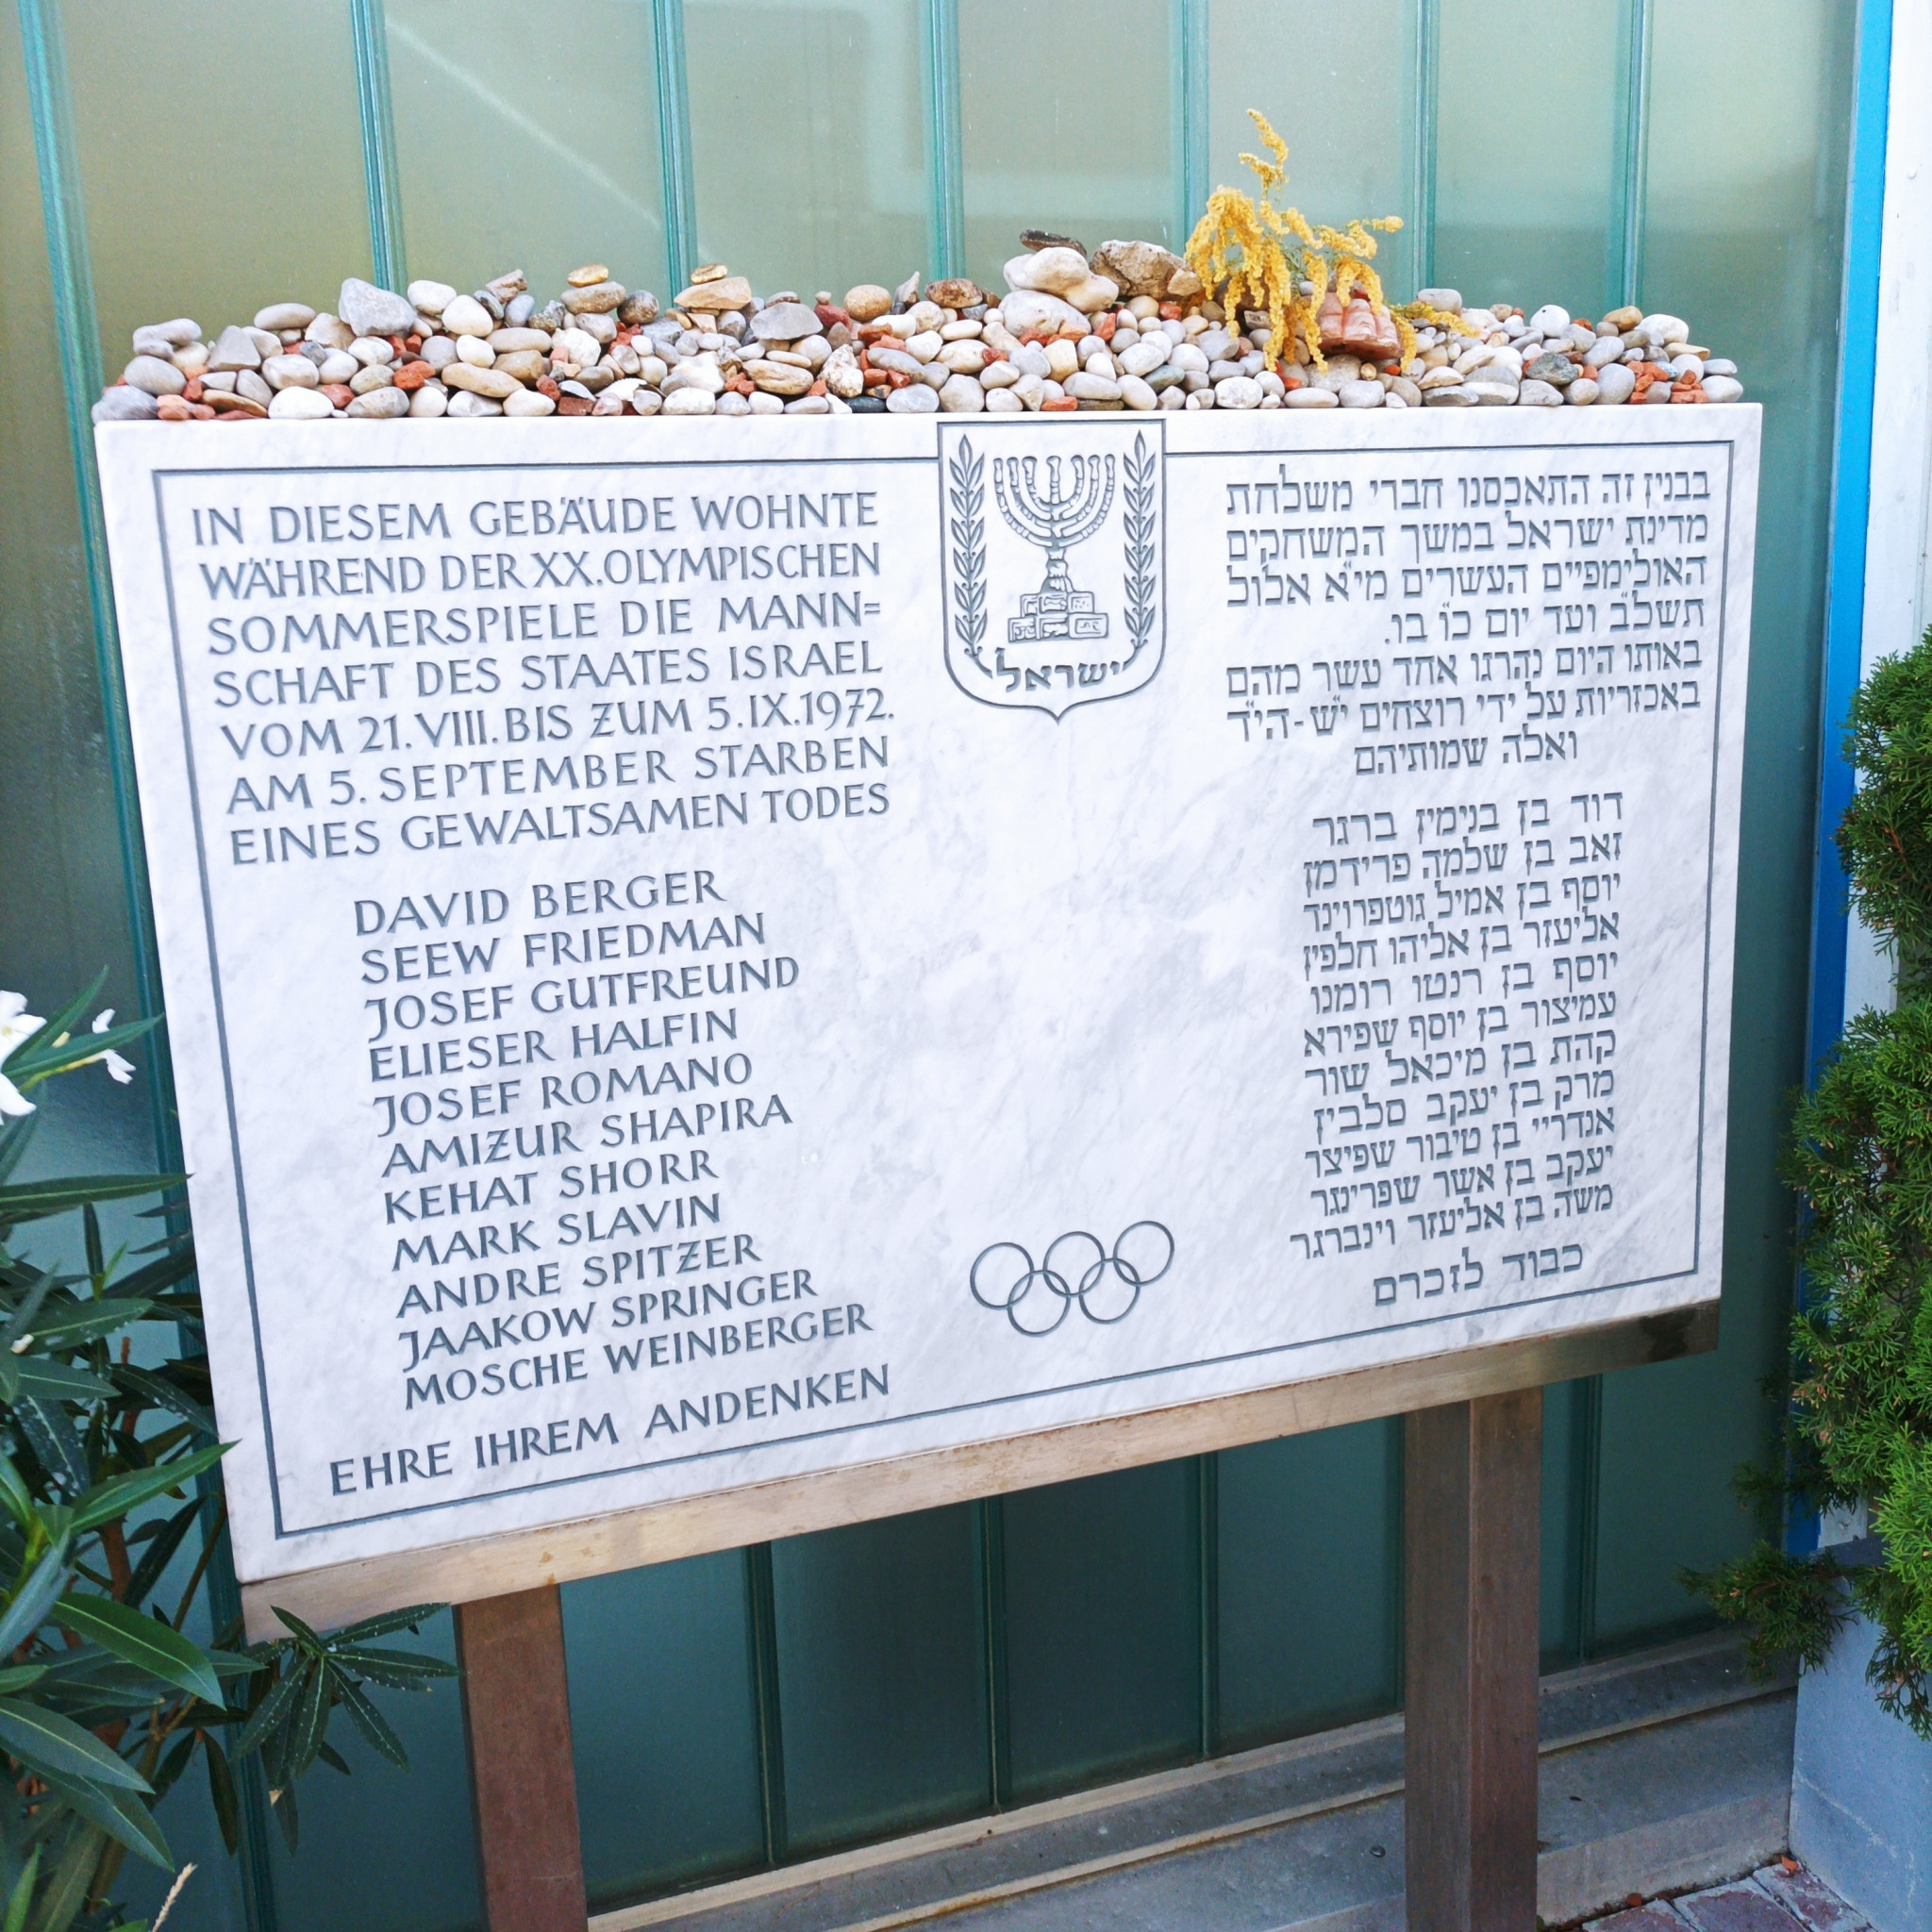 A memorial remains in the 1972 Olympic Village at 31 Connollystrasse, where the original attack on the Israeli quarters was made ©ITG